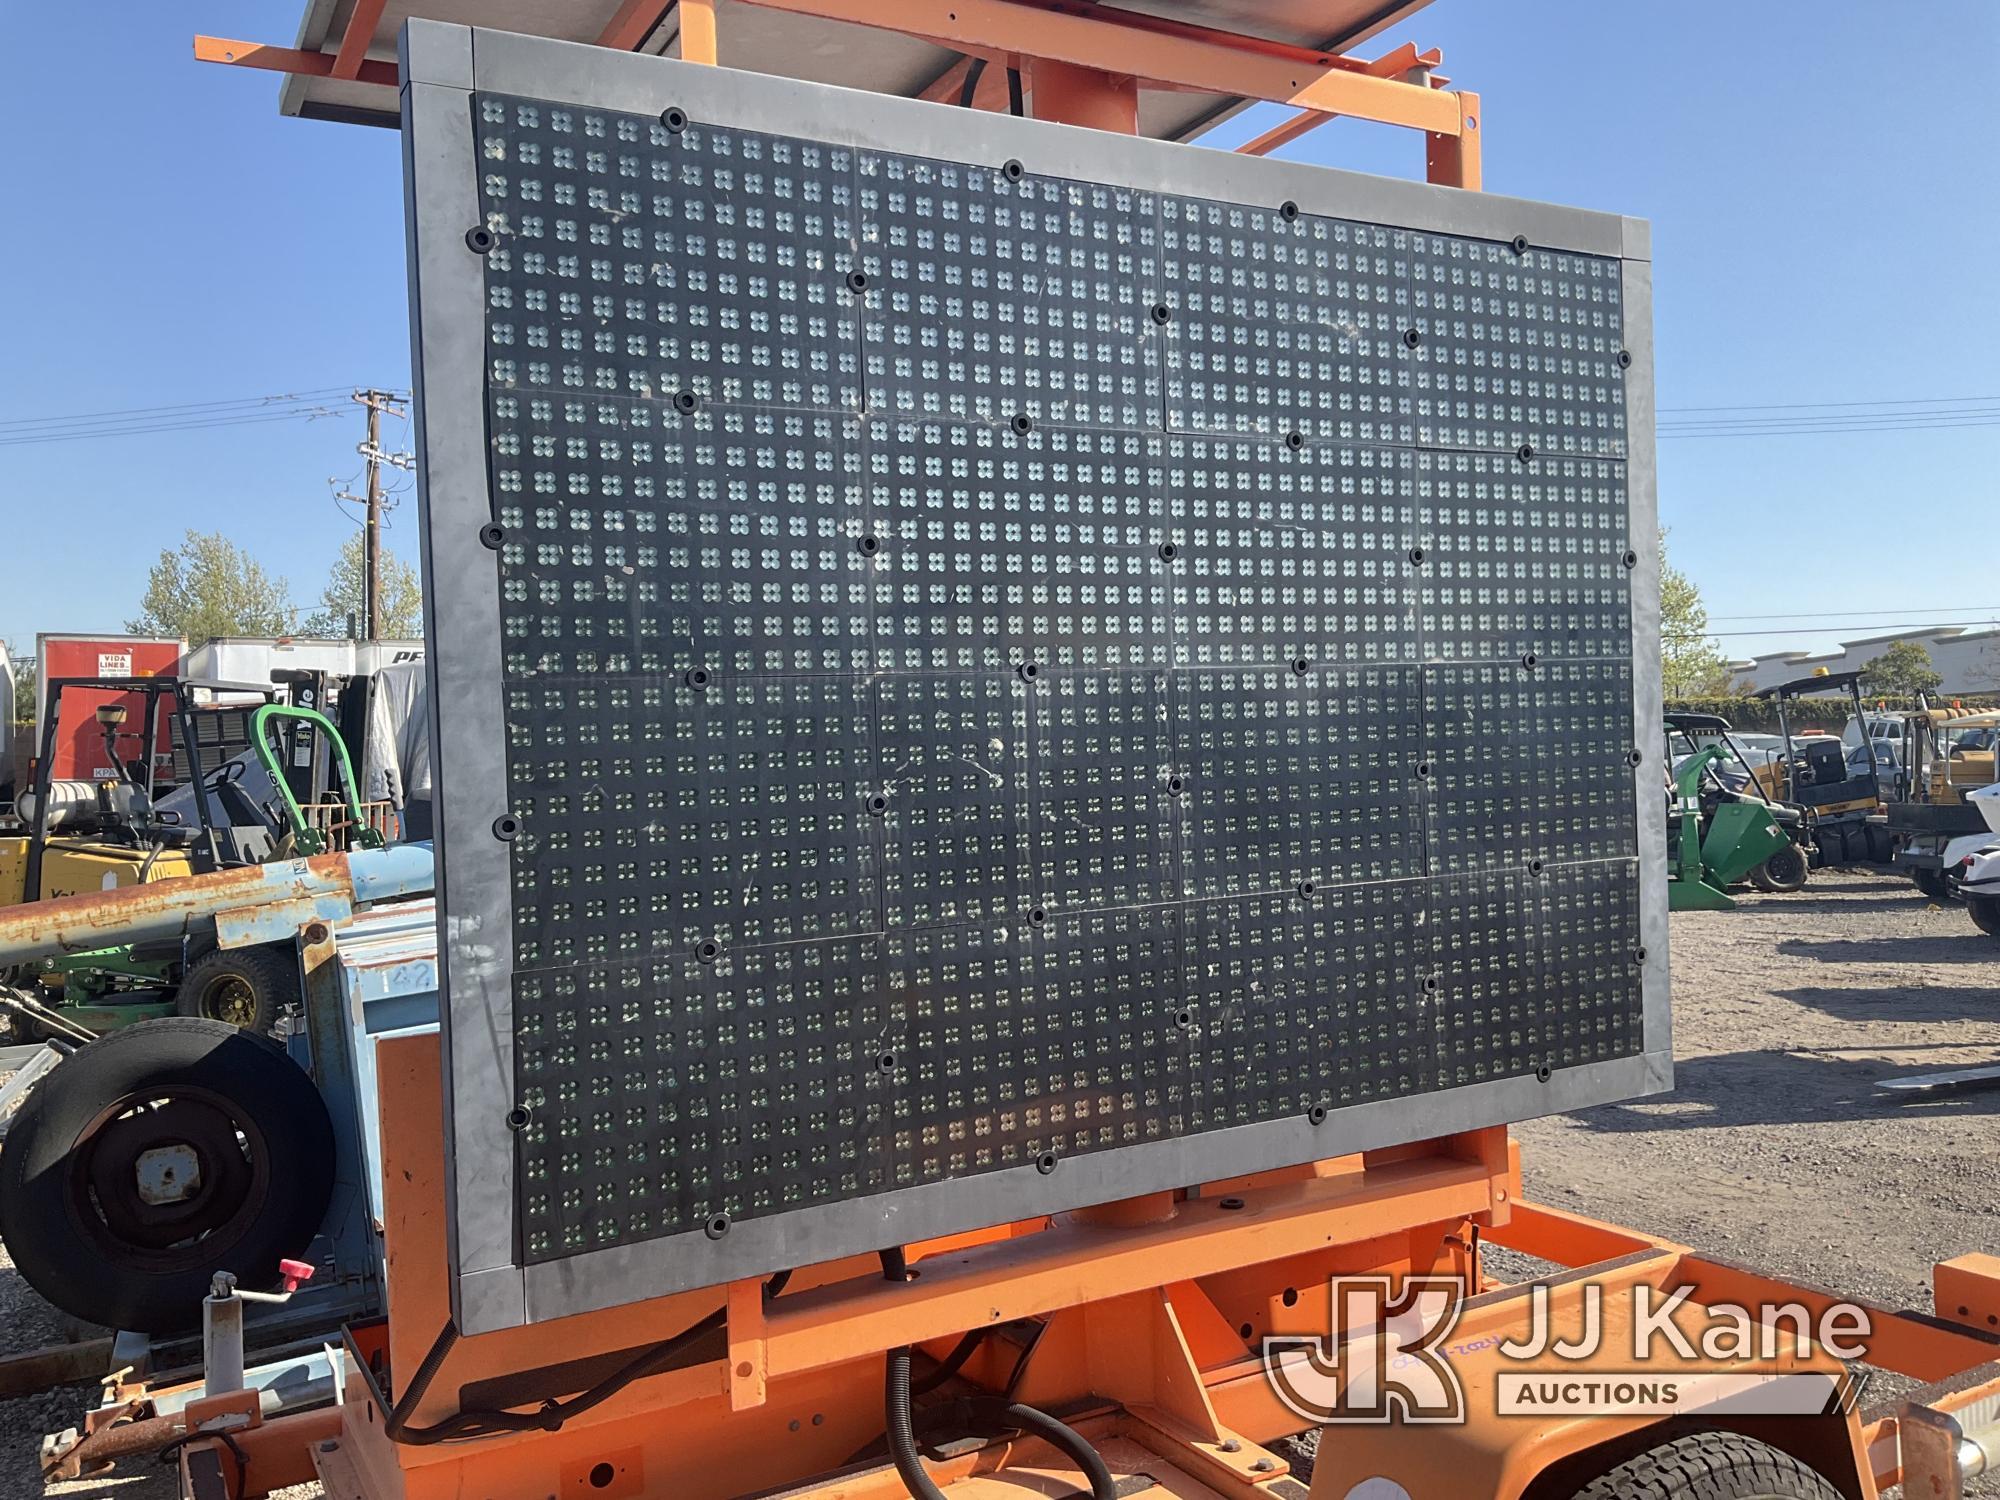 (Jurupa Valley, CA) 2010 Addco DH-500 Portable Message Board Not Operating, True Hours Unknown, Appl